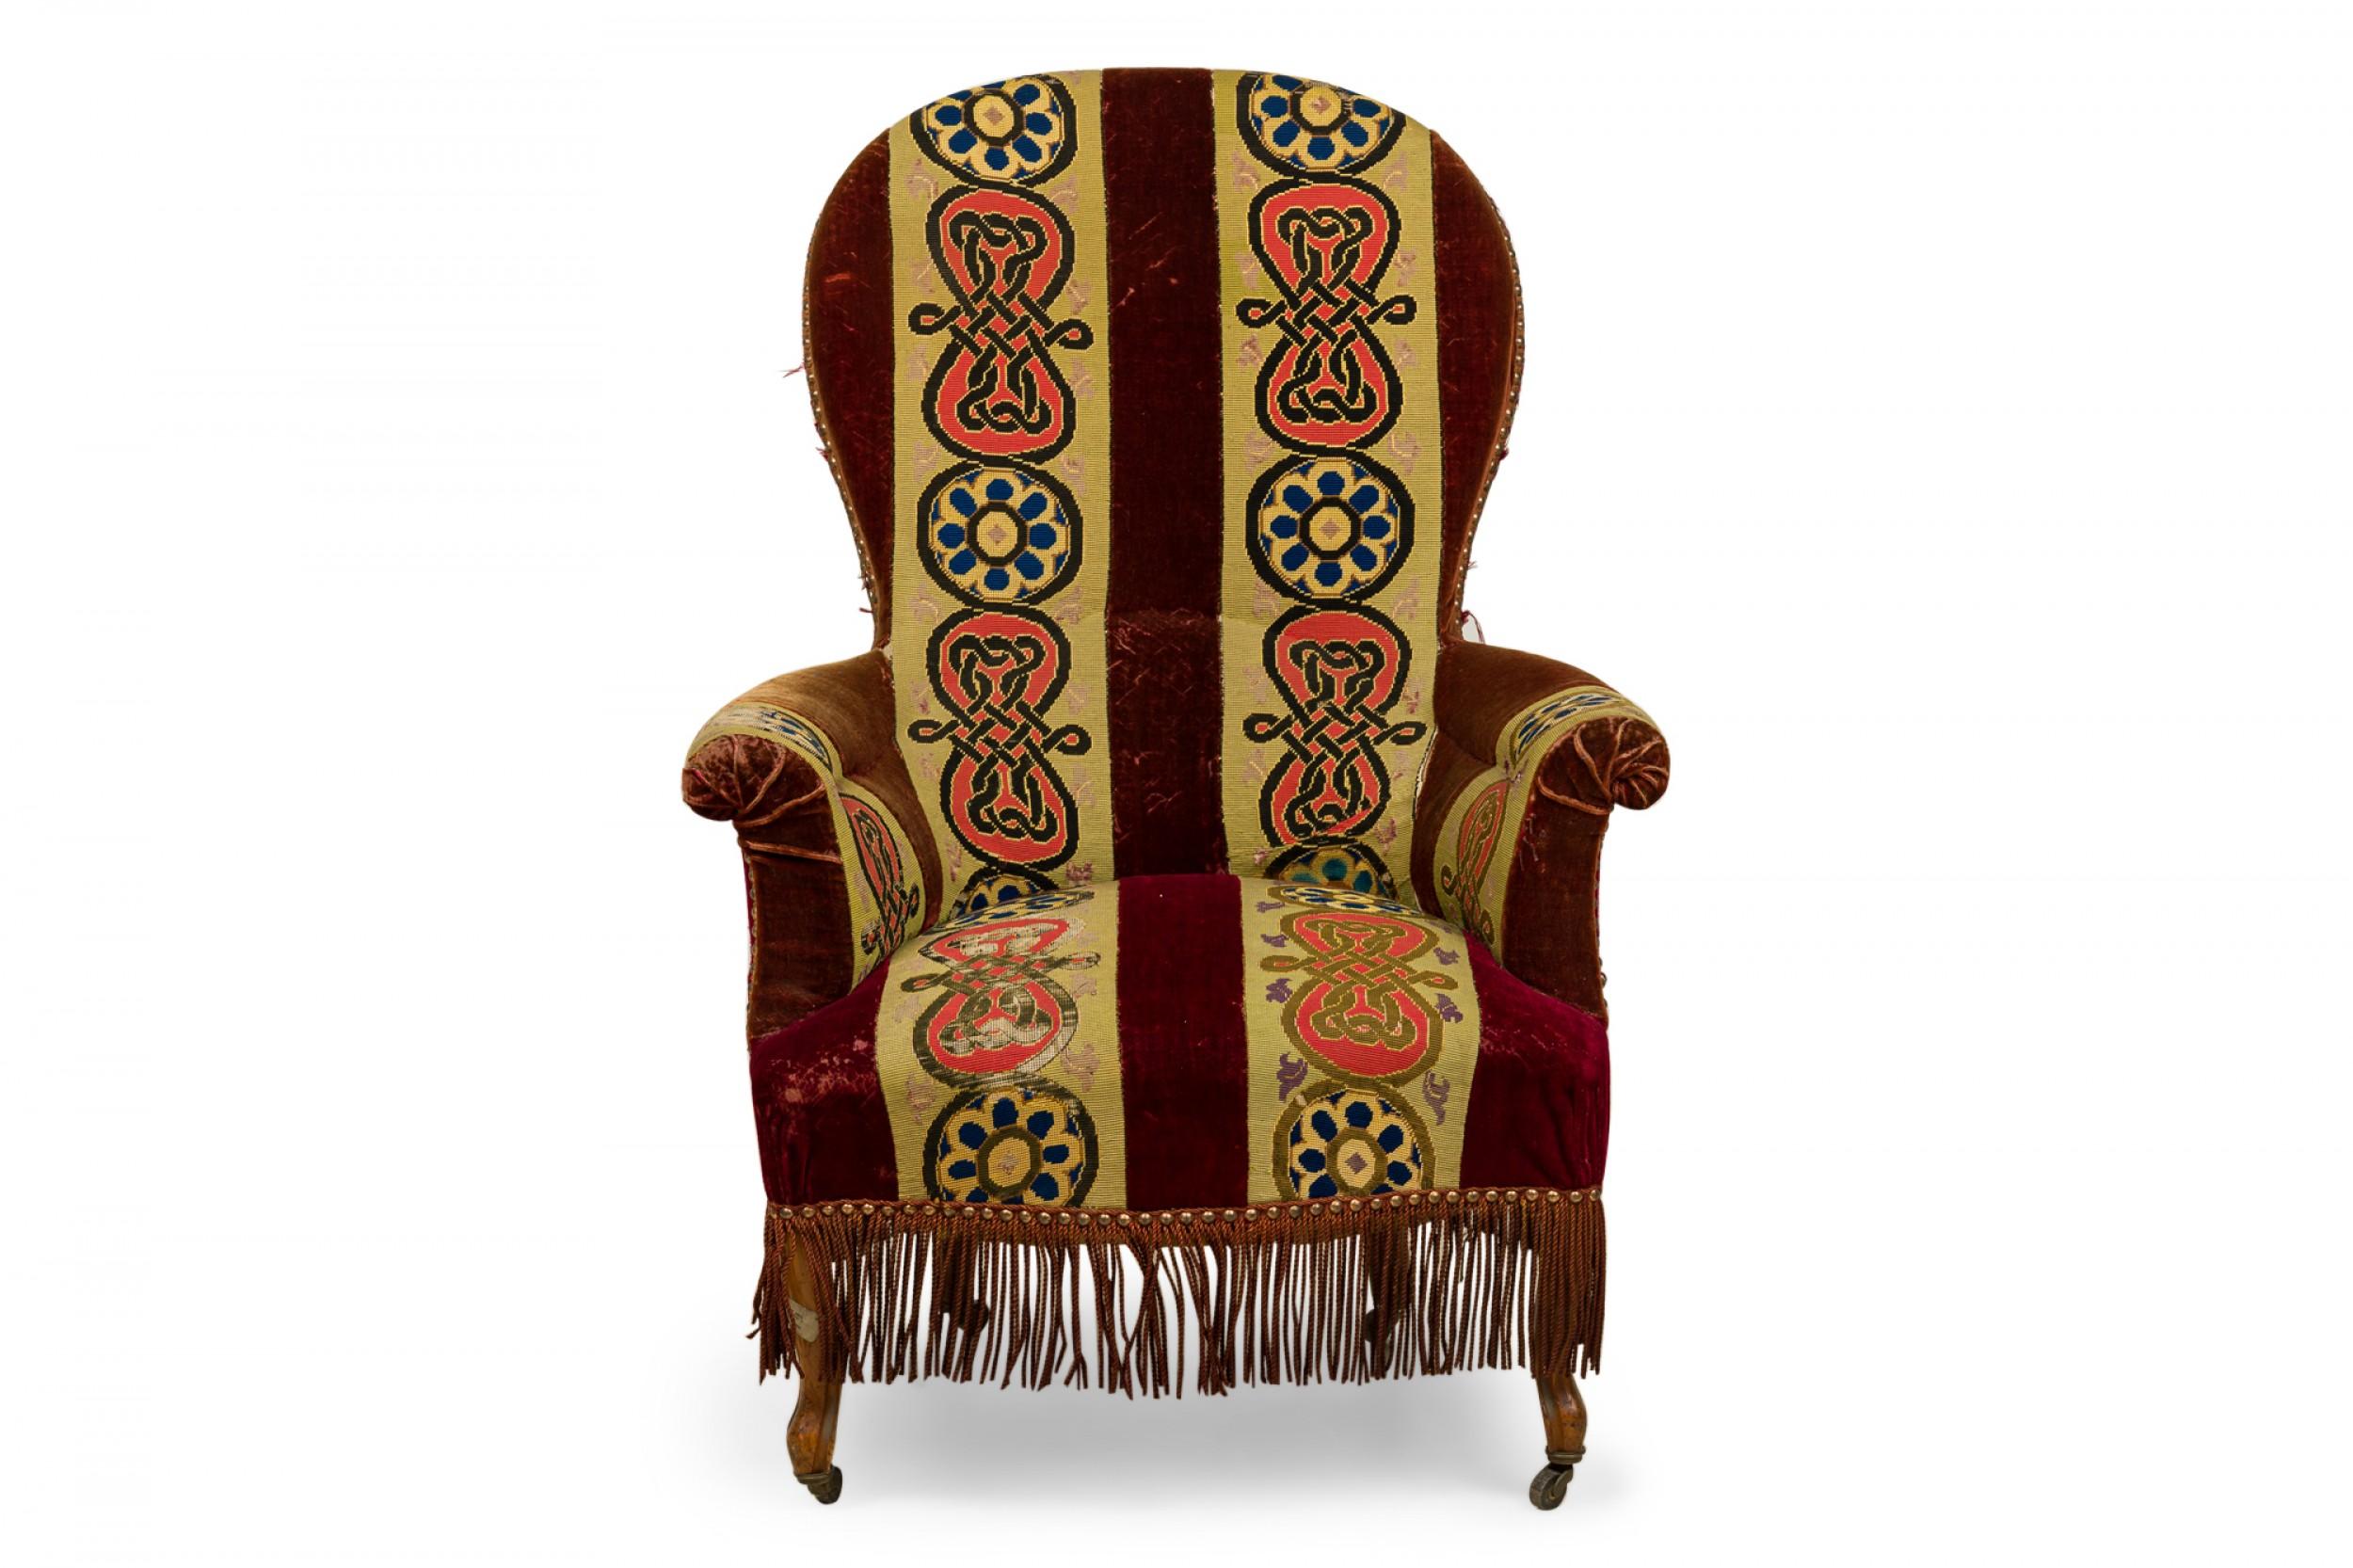 French Victorian balloon back armchair upholstered in a deep red velvet with broad vertical stripes featuring knit and floral designs in beige, pink, and blue, resting on four shaped mahogany legs ending in small brass casters, partially concealed